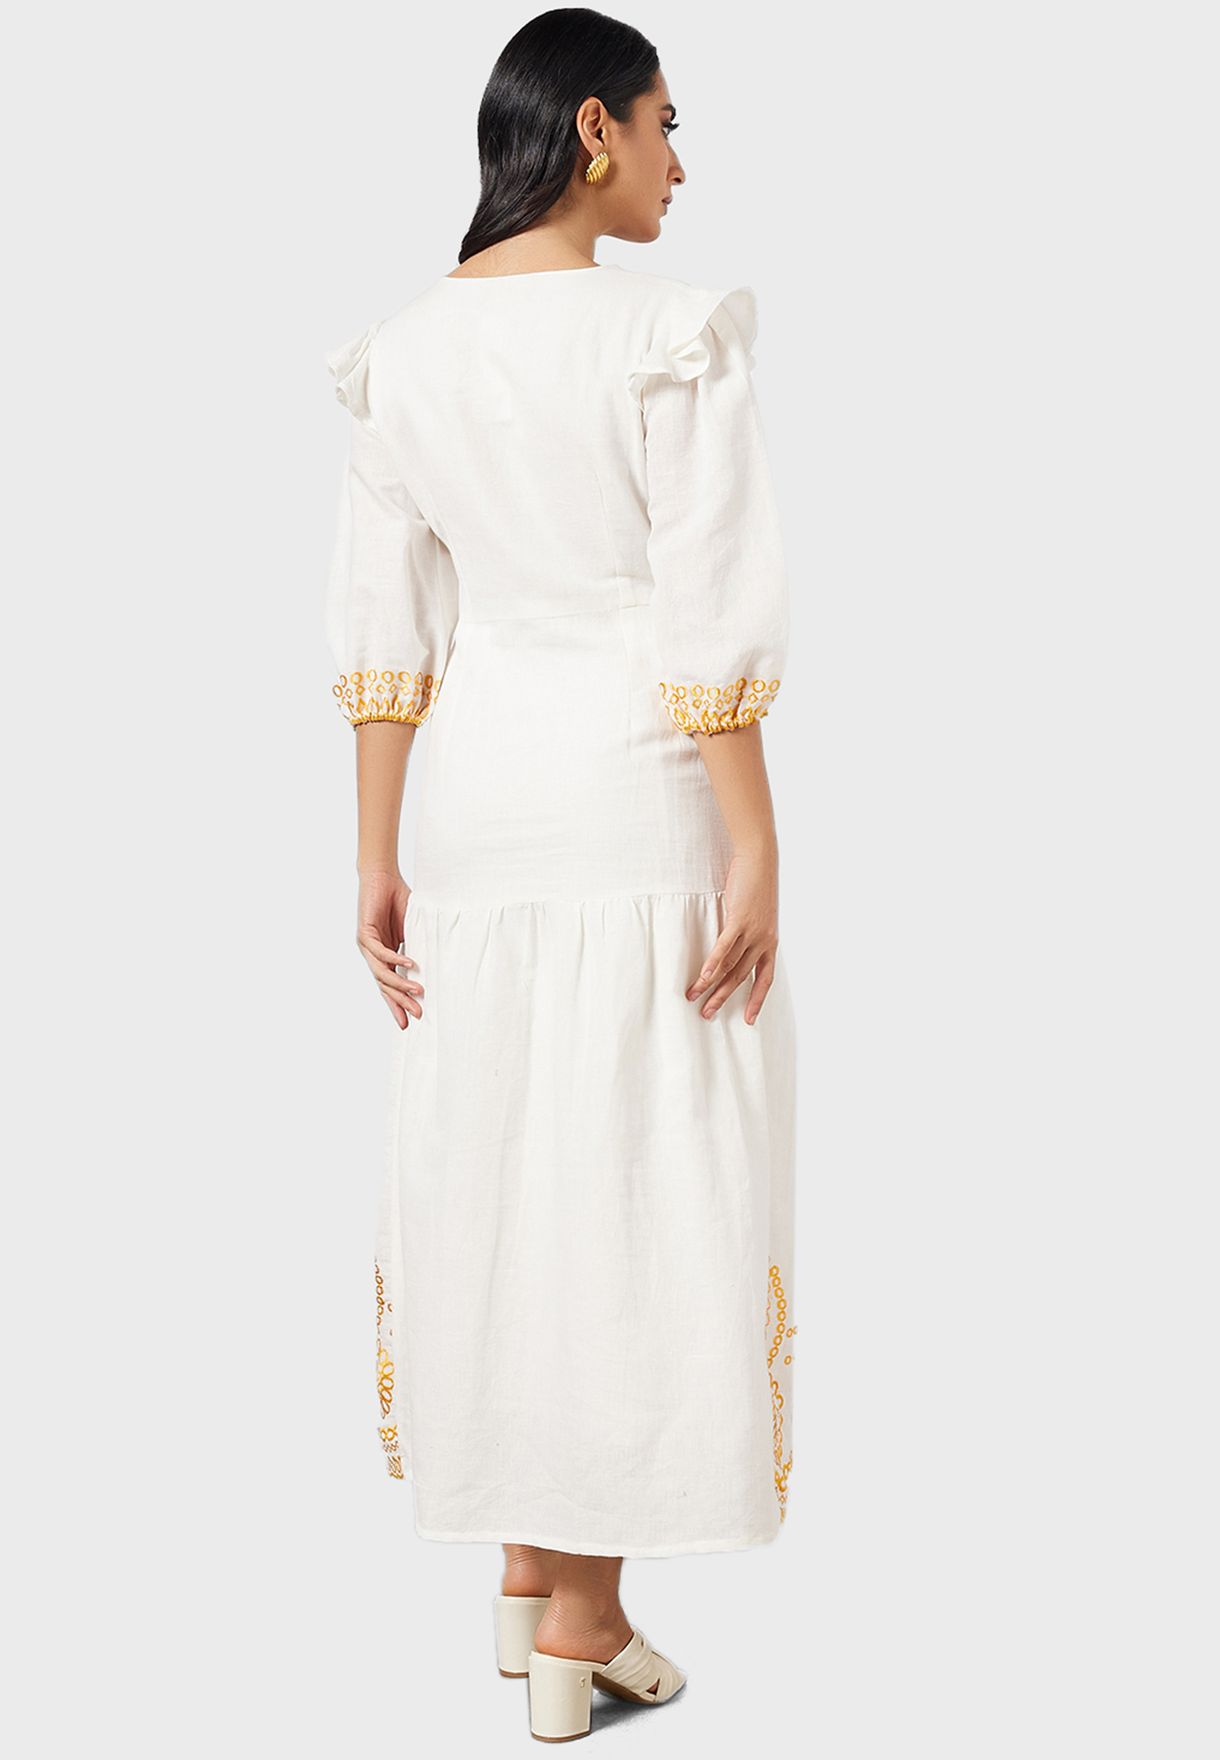 Contrast Embroidery Dress